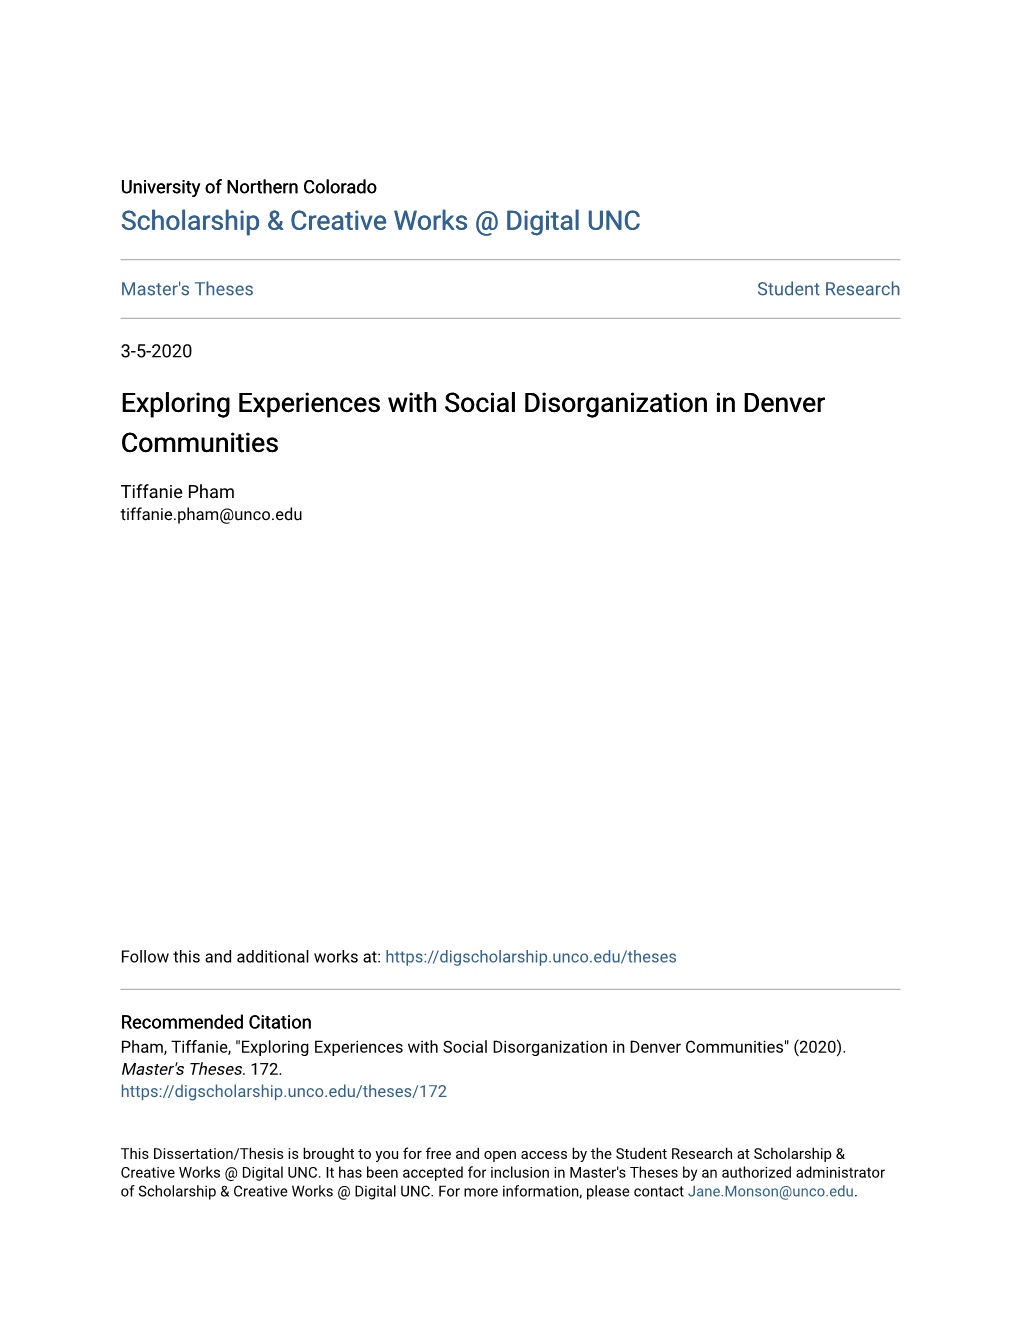 Exploring Experiences with Social Disorganization in Denver Communities